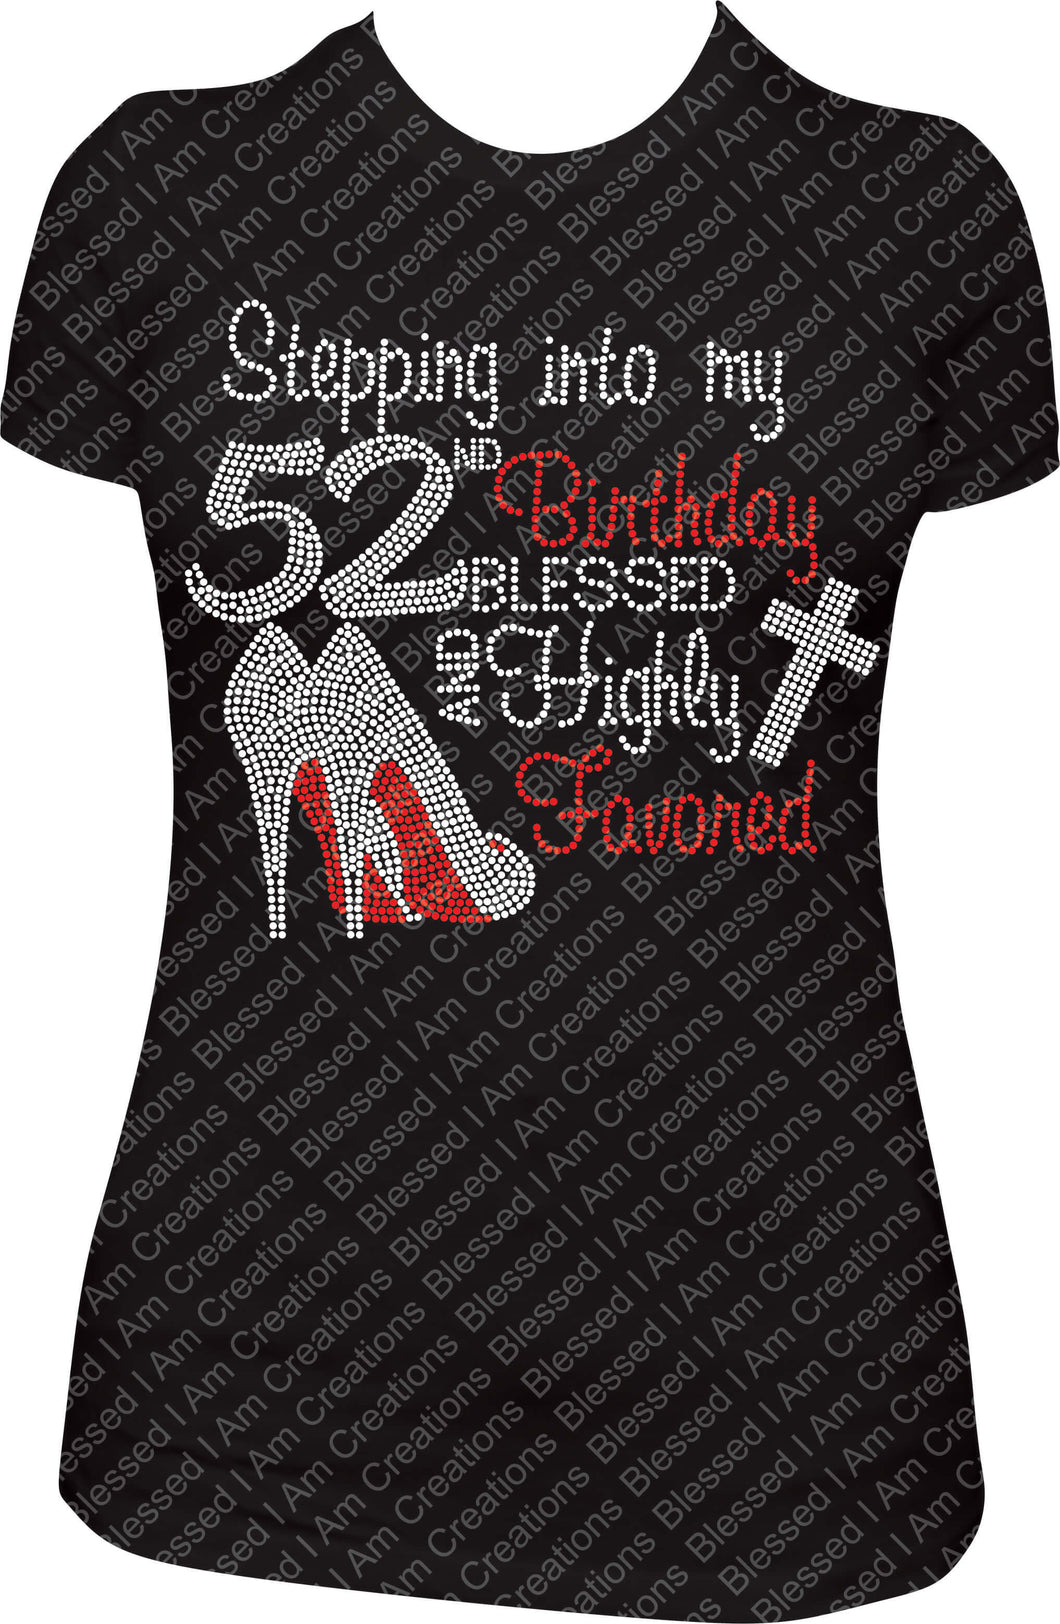 Stepping into my 52nd Birthday Blessed and Highly Favored rhinestone Birthday Shirt